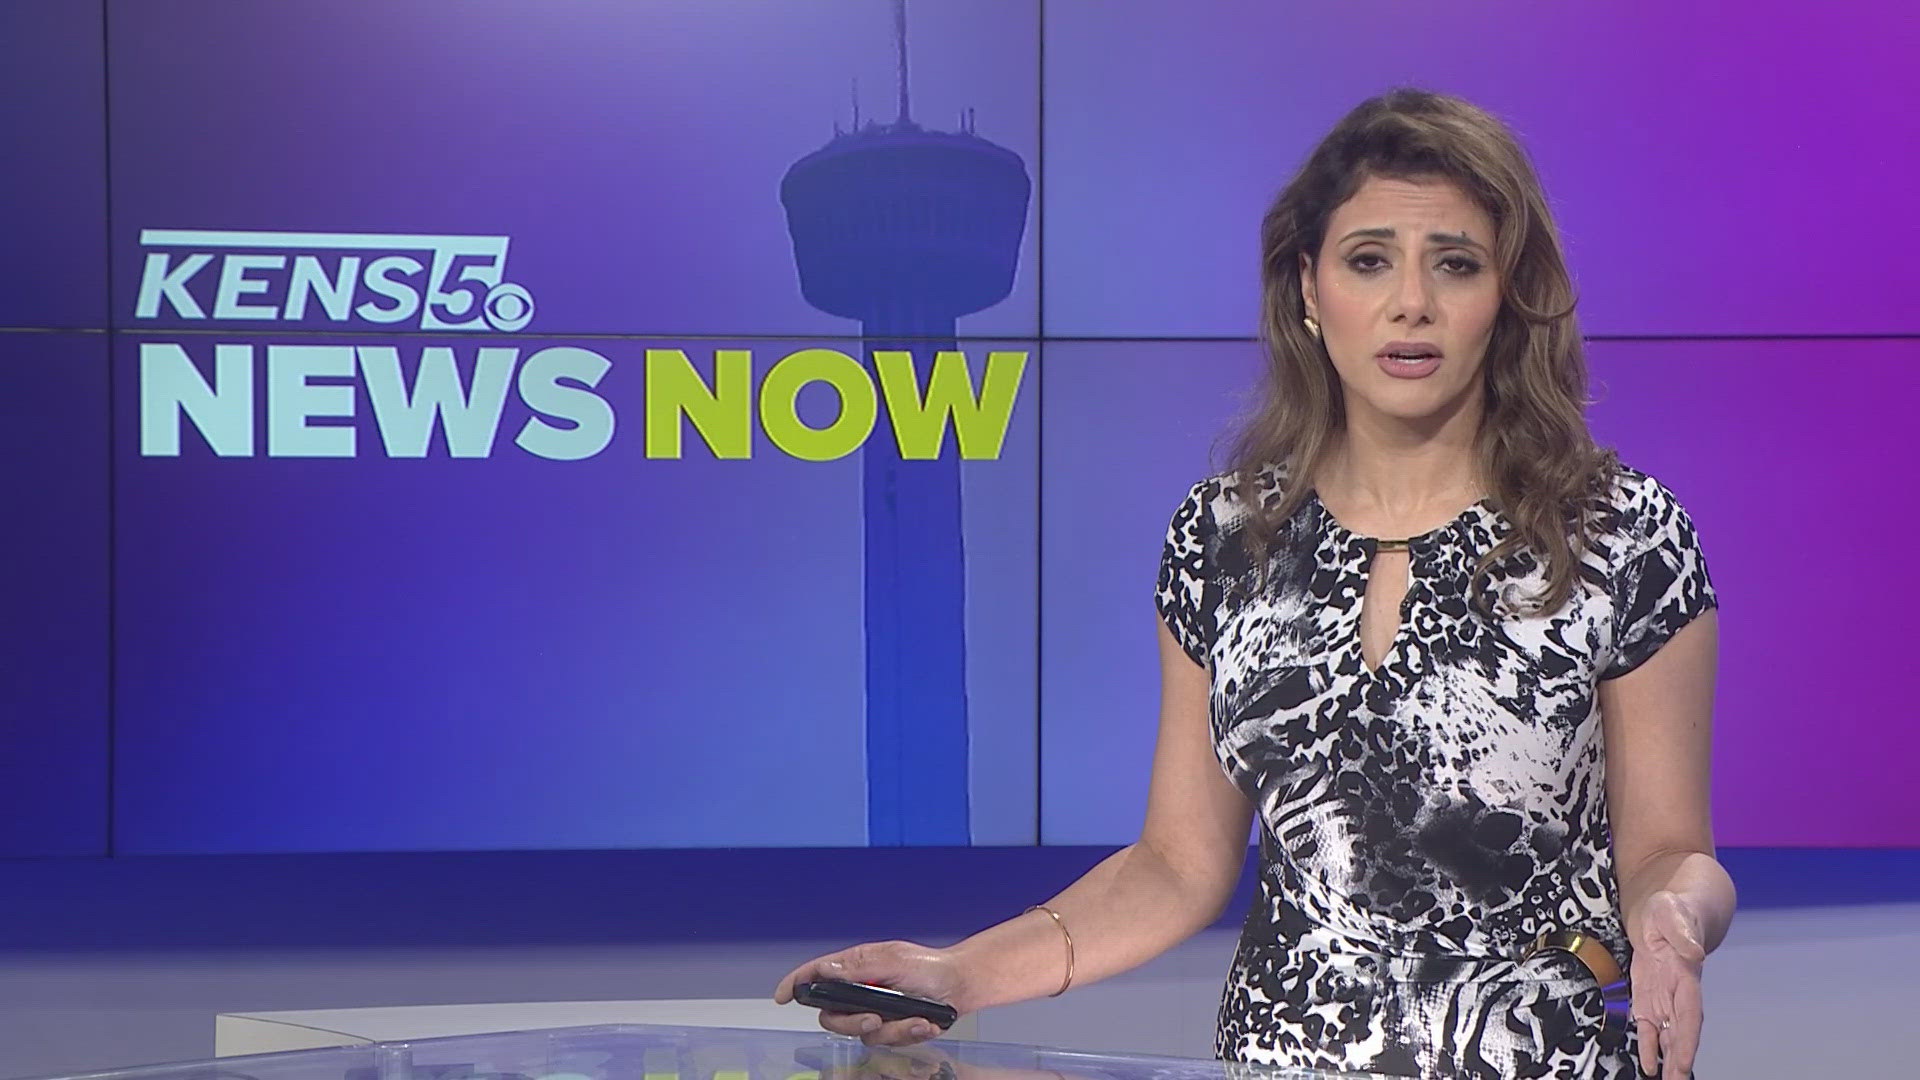 Follow us here to get the latest top headlines with KENS 5 anchor Sarah Forgany every weekday!